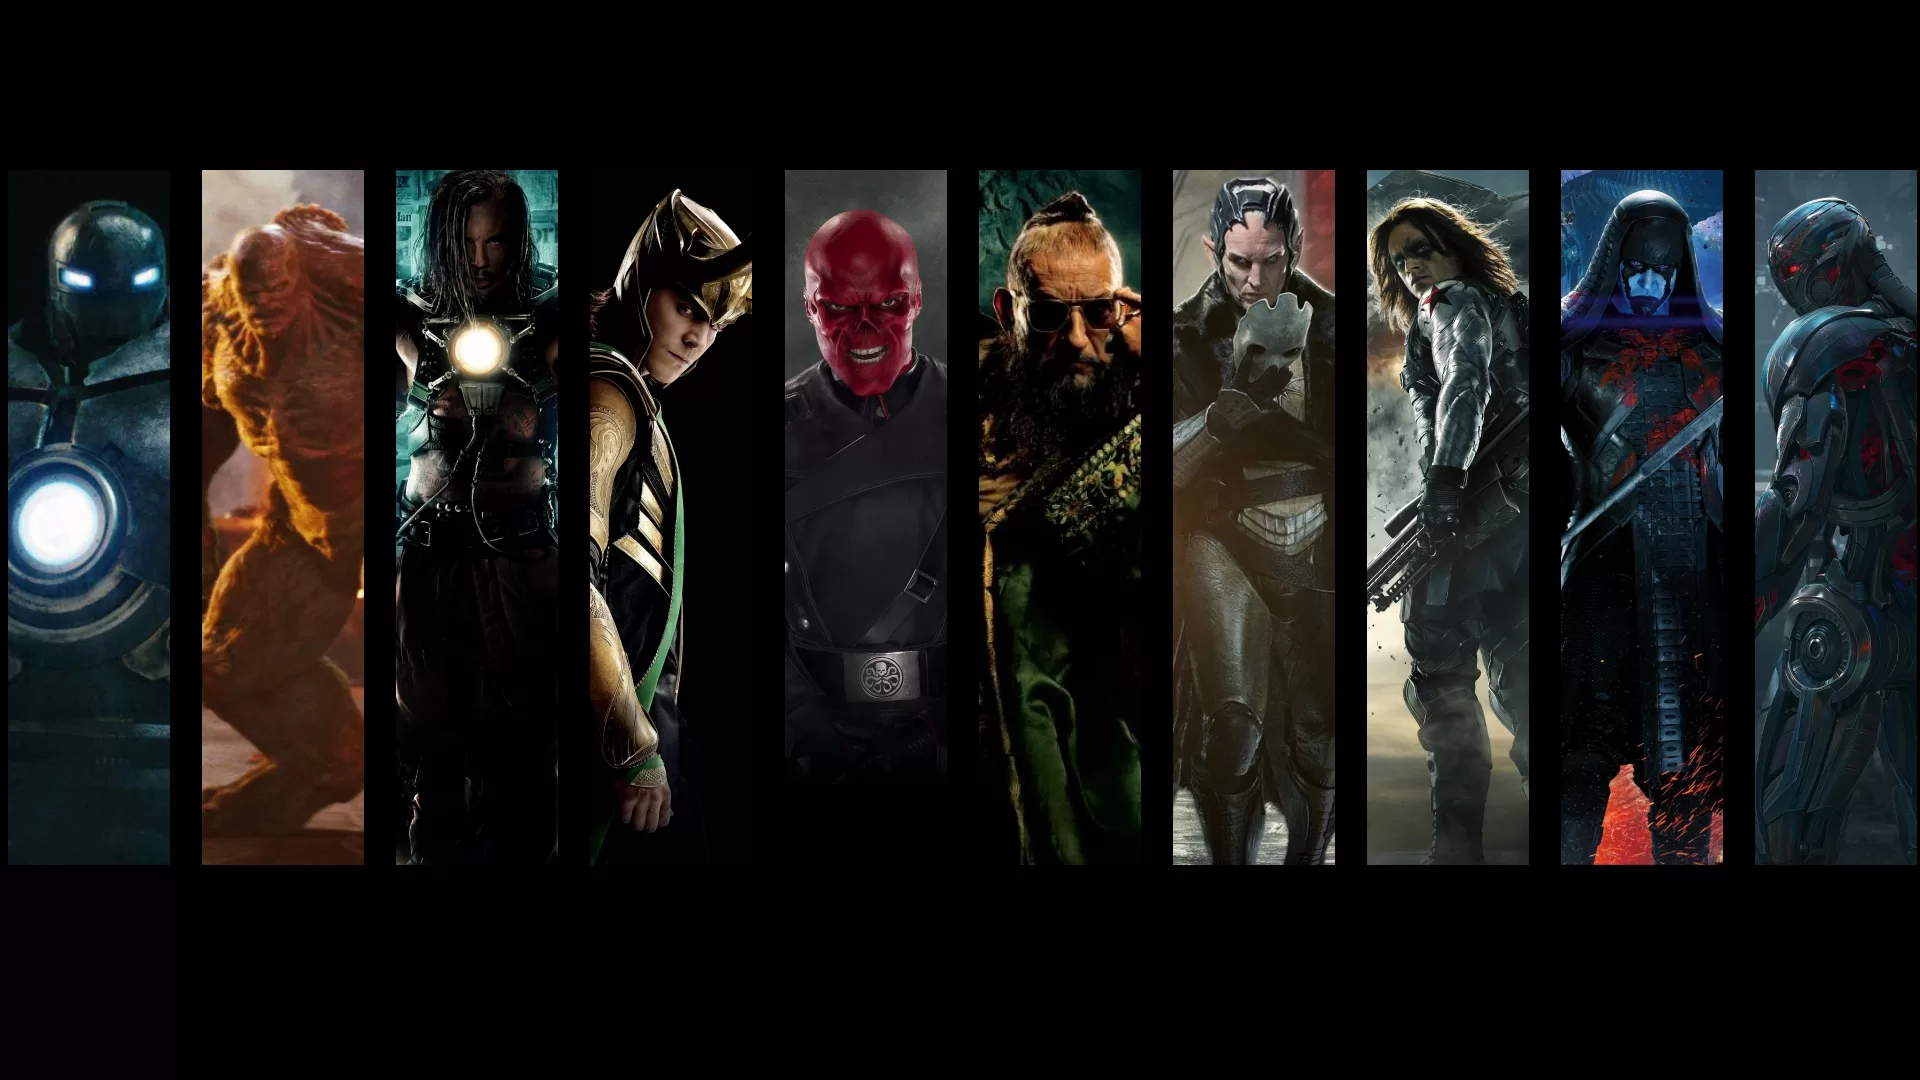 Among MCU villains, who is the biggest baddie?